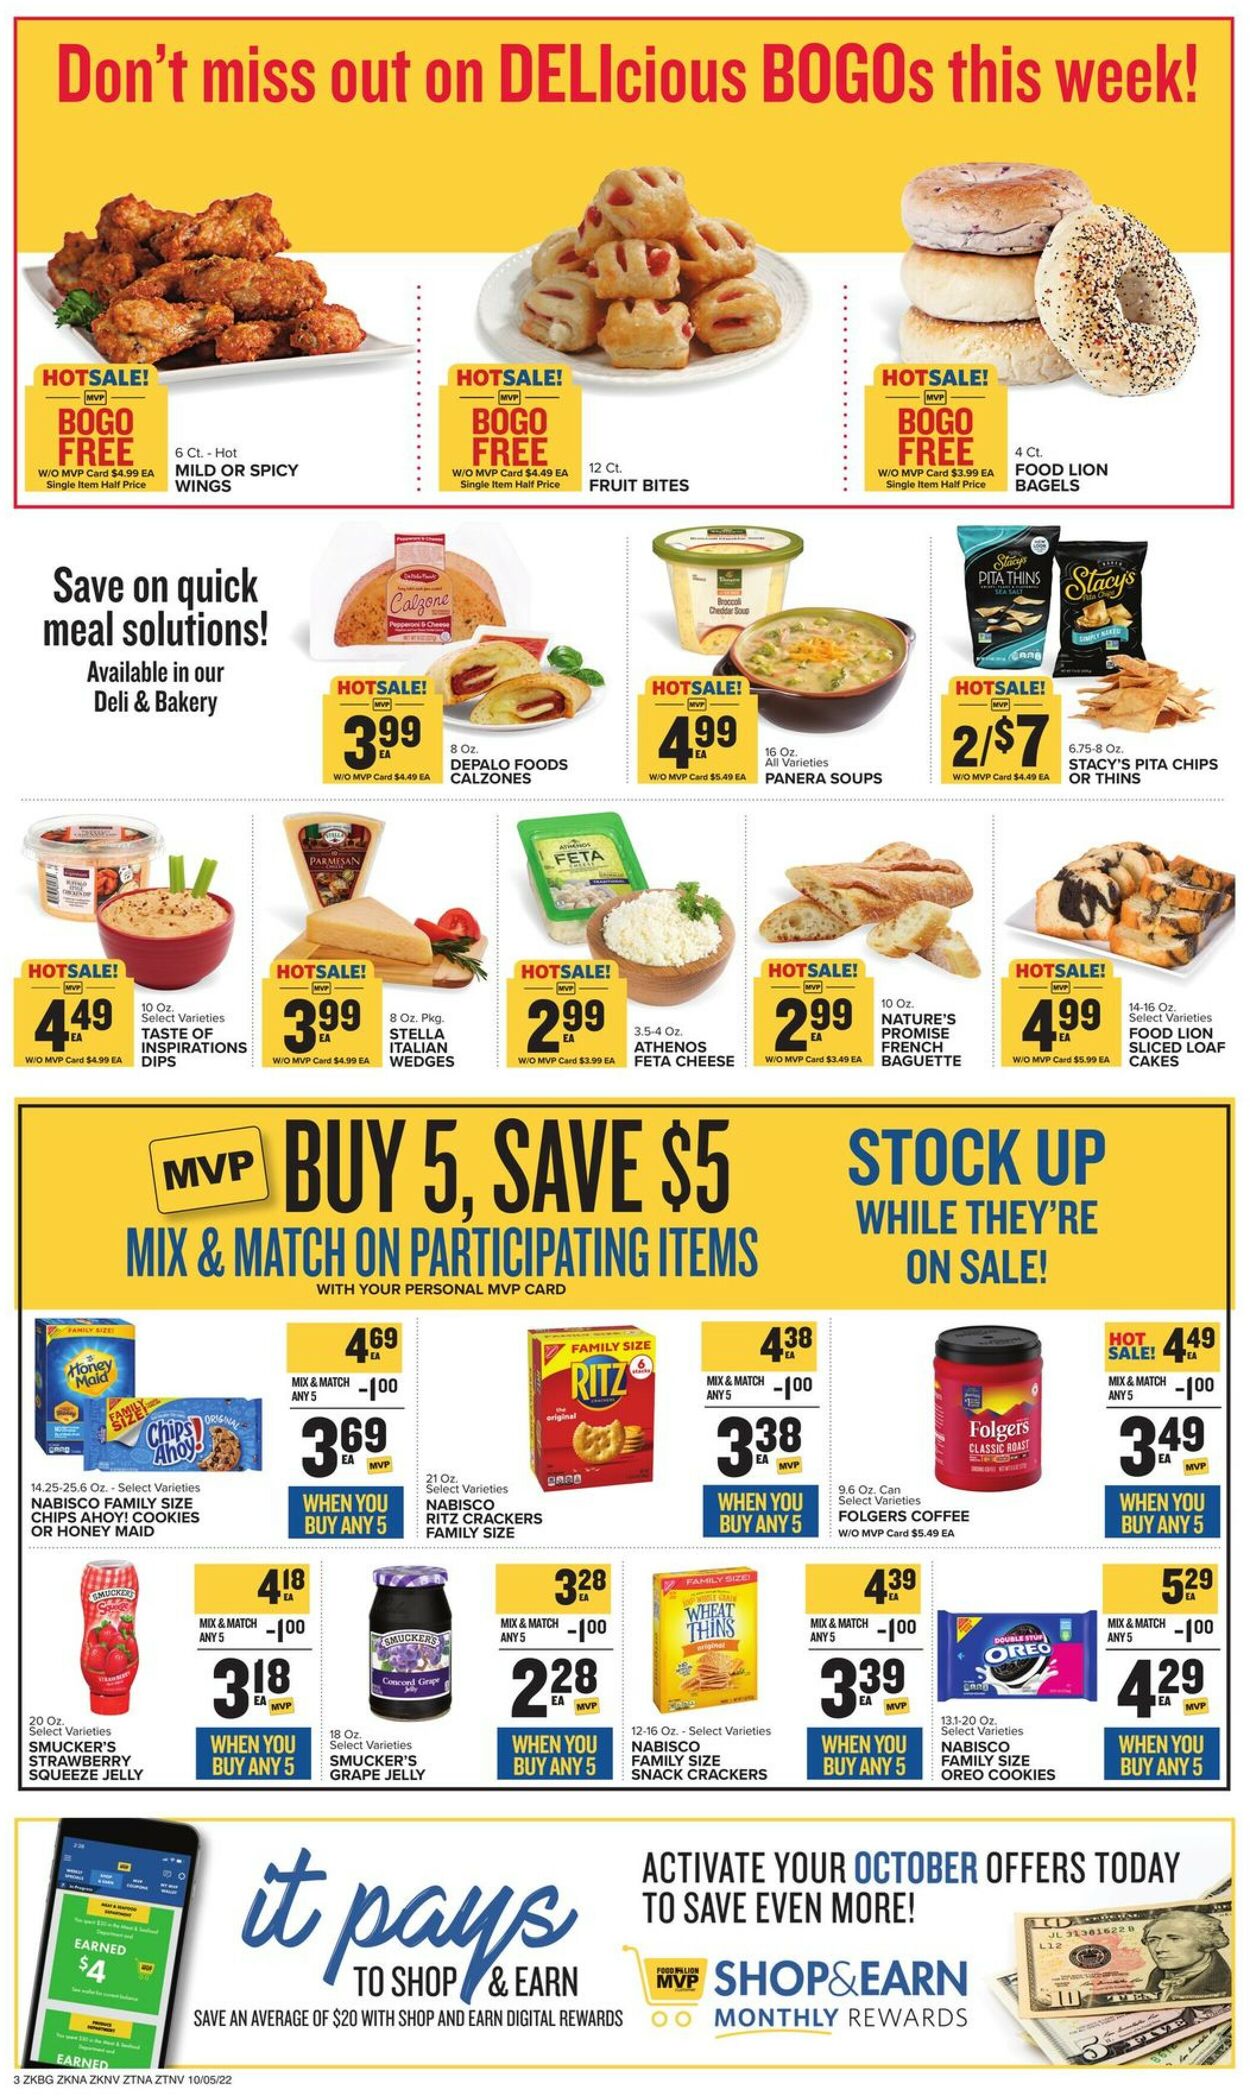 Catalogue Food Lion from 10/05/2022